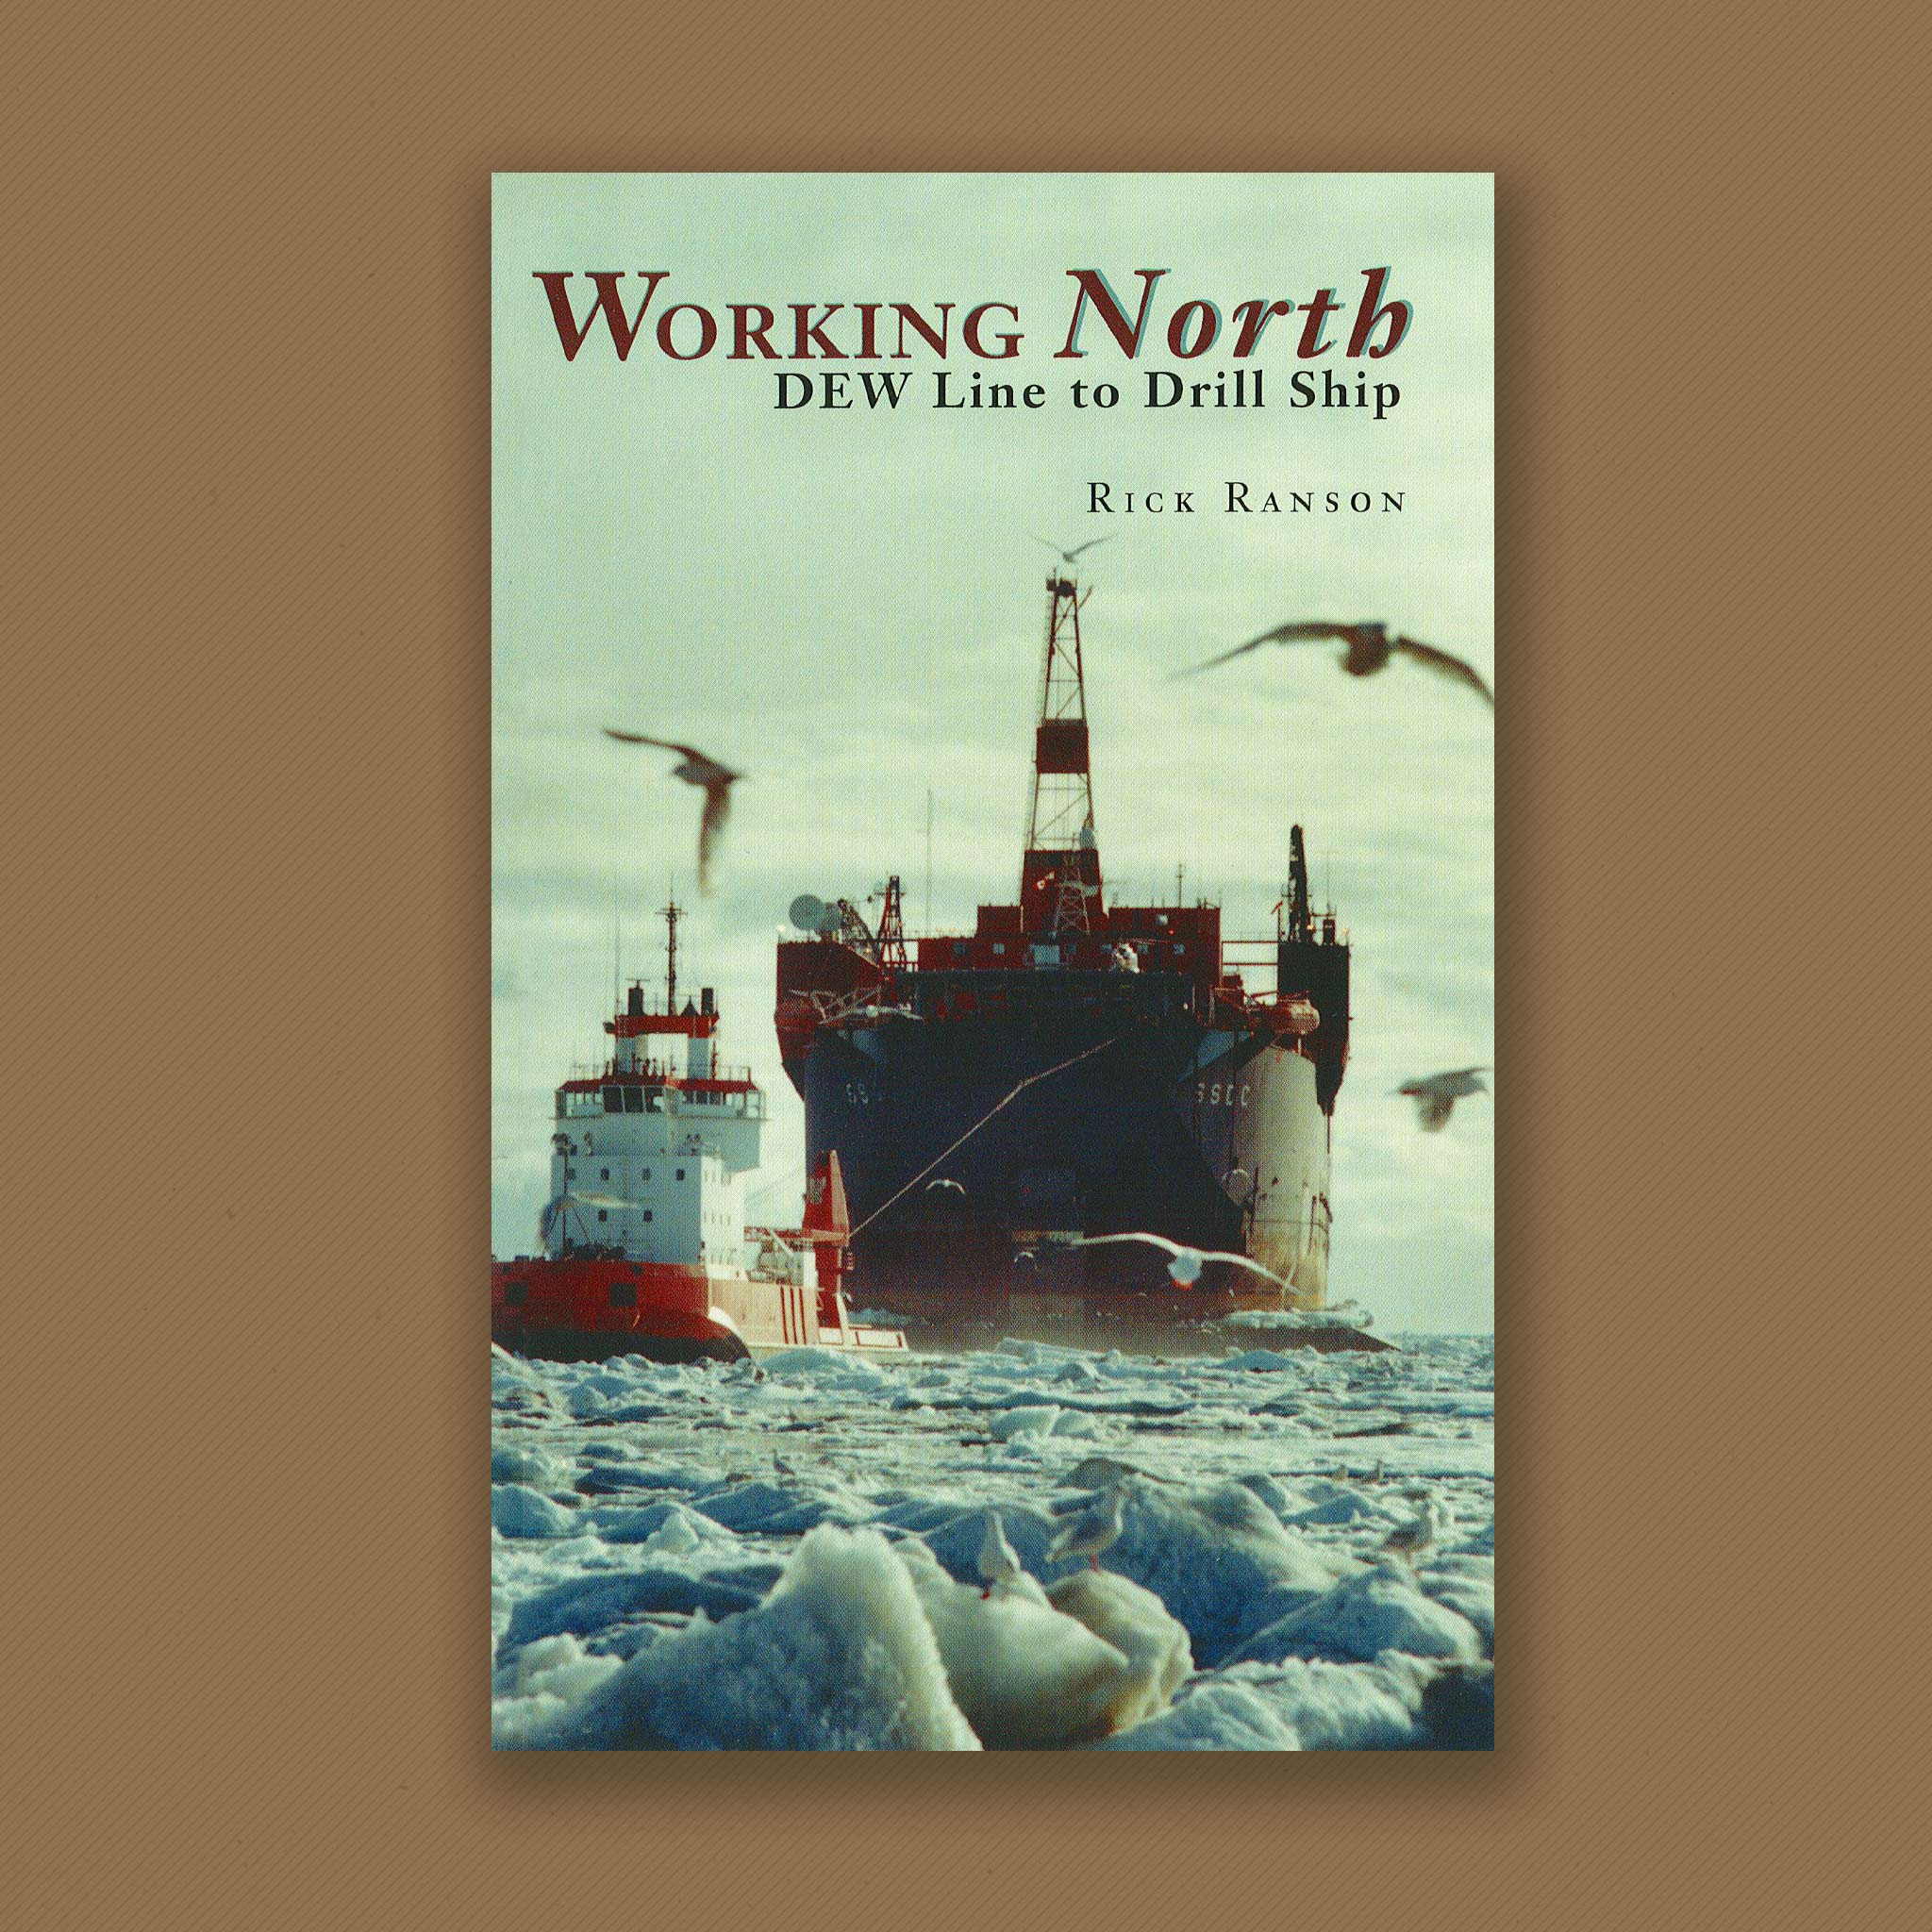 Working North: From Dew Line to Drill Ship